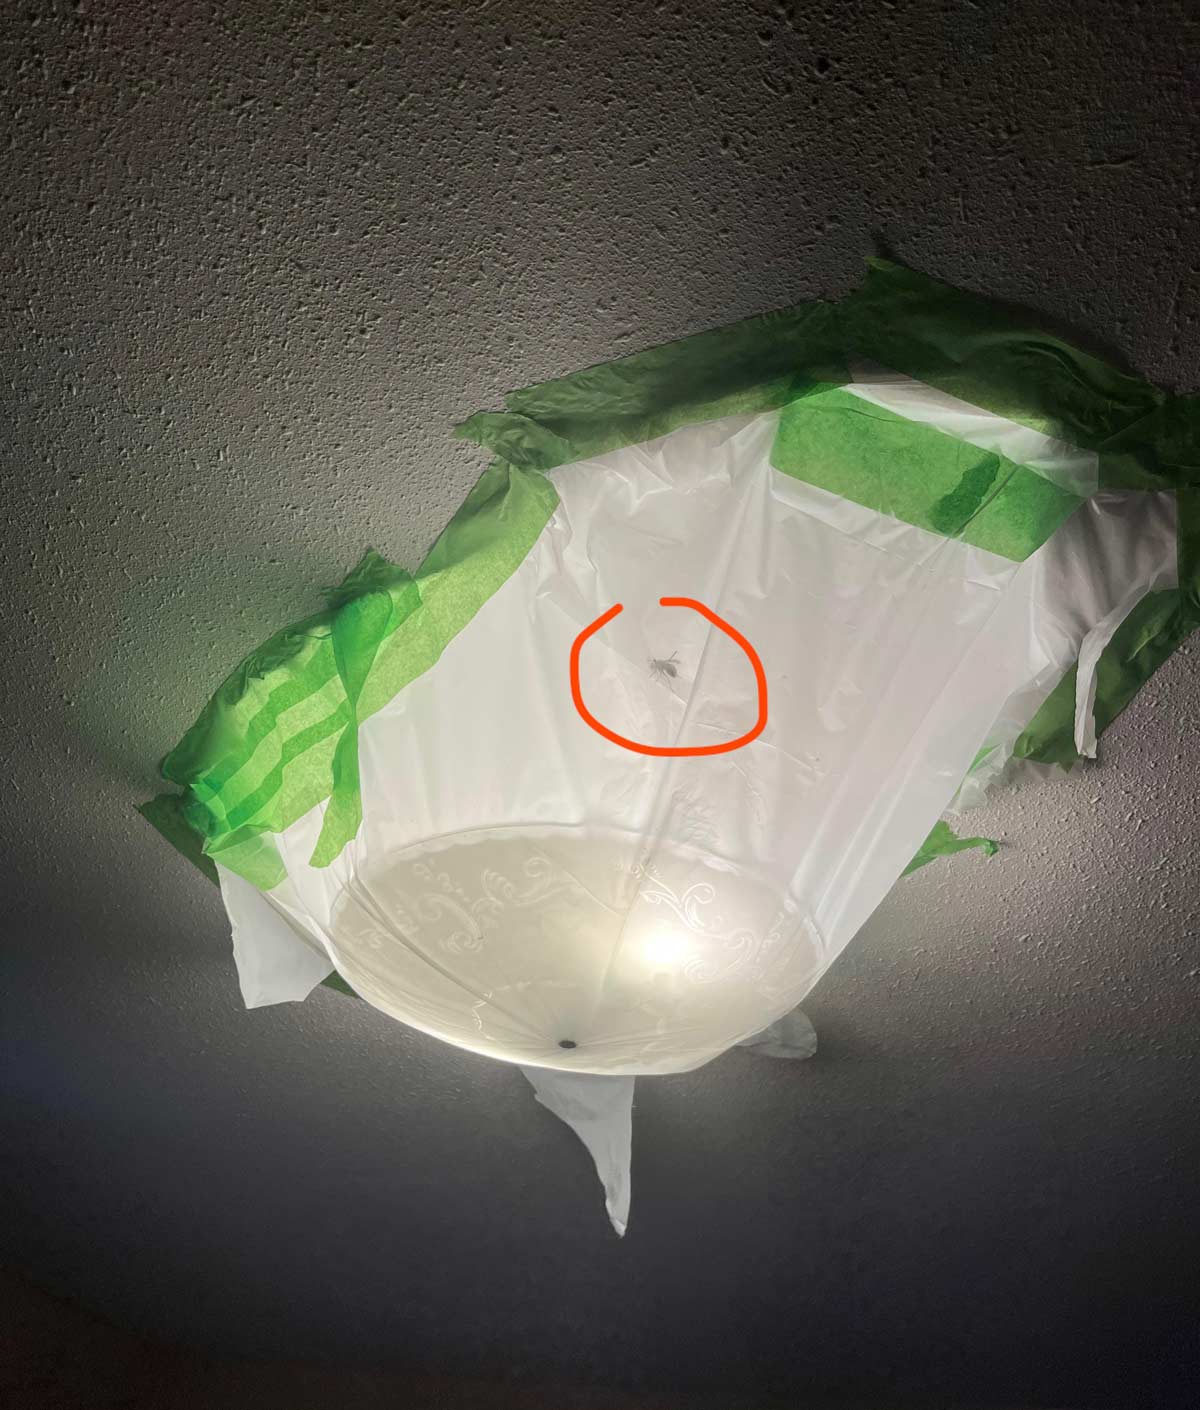 This seemed the most logical response to a wasp in my light shade